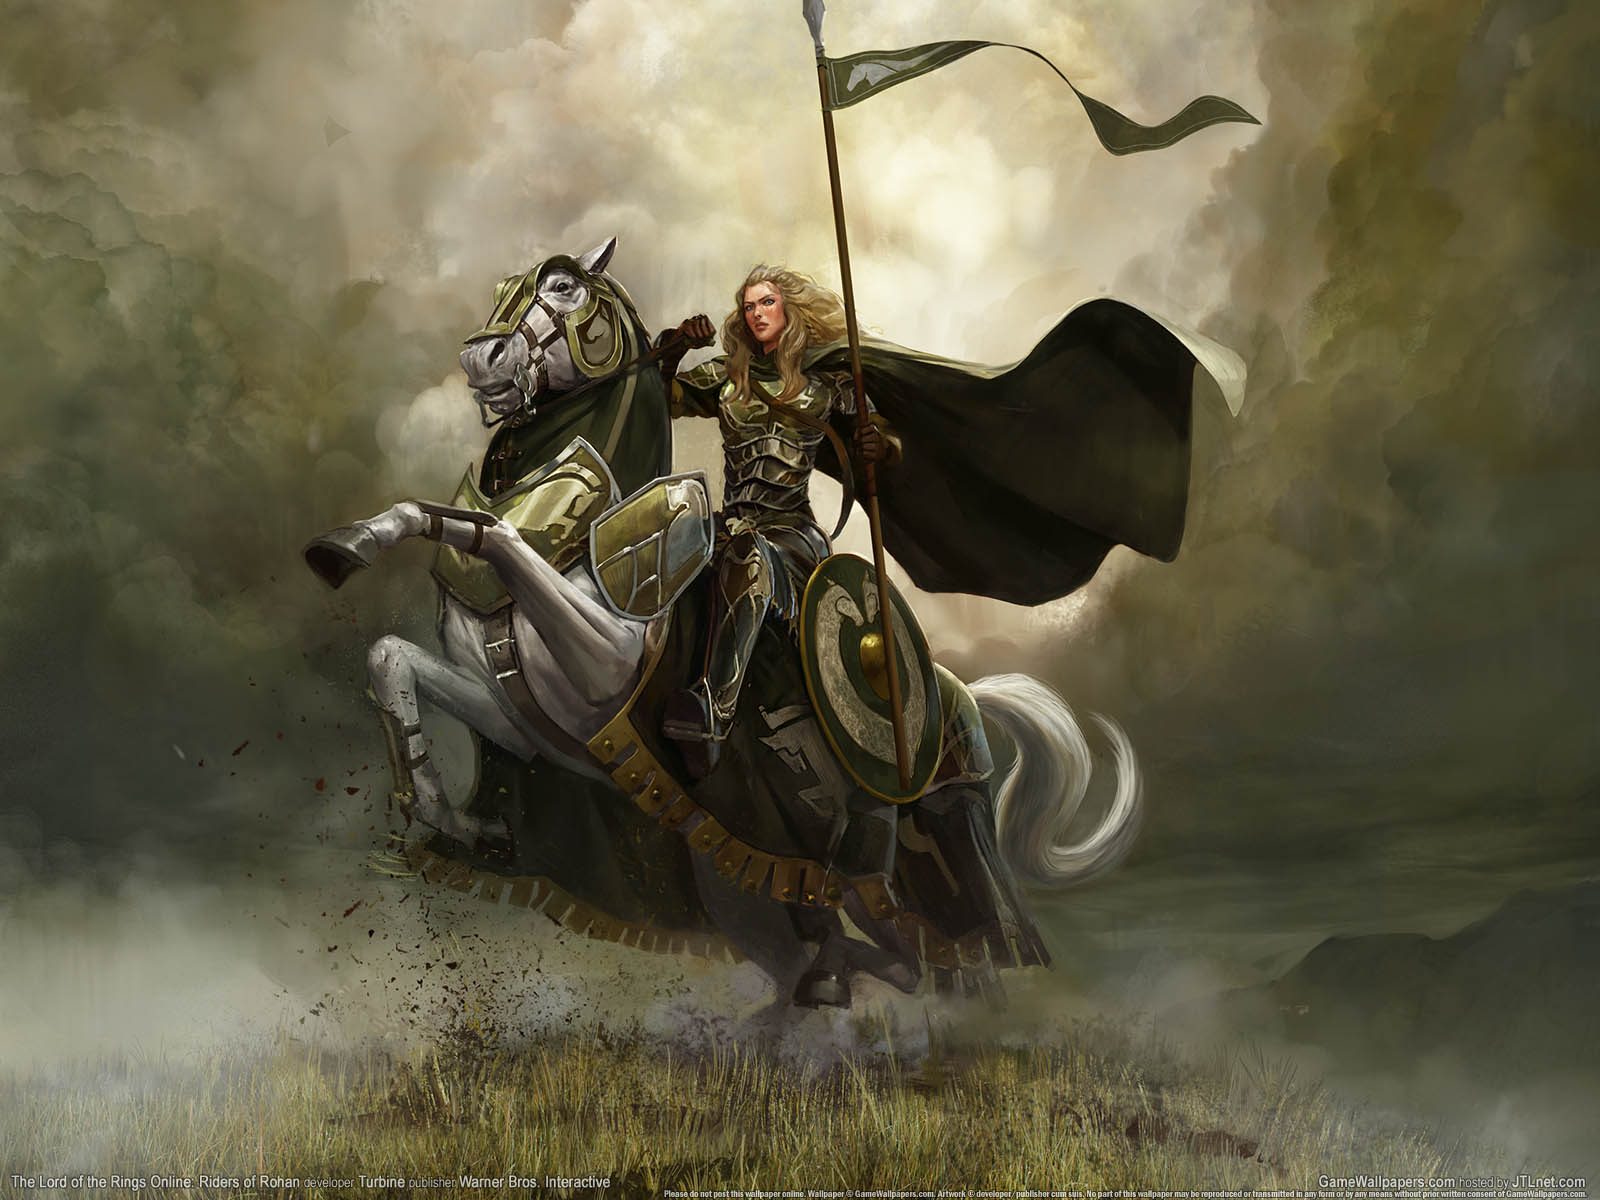 The Lord of the Rings Online%3A Riders of Rohan wallpaper 02 1600x1200